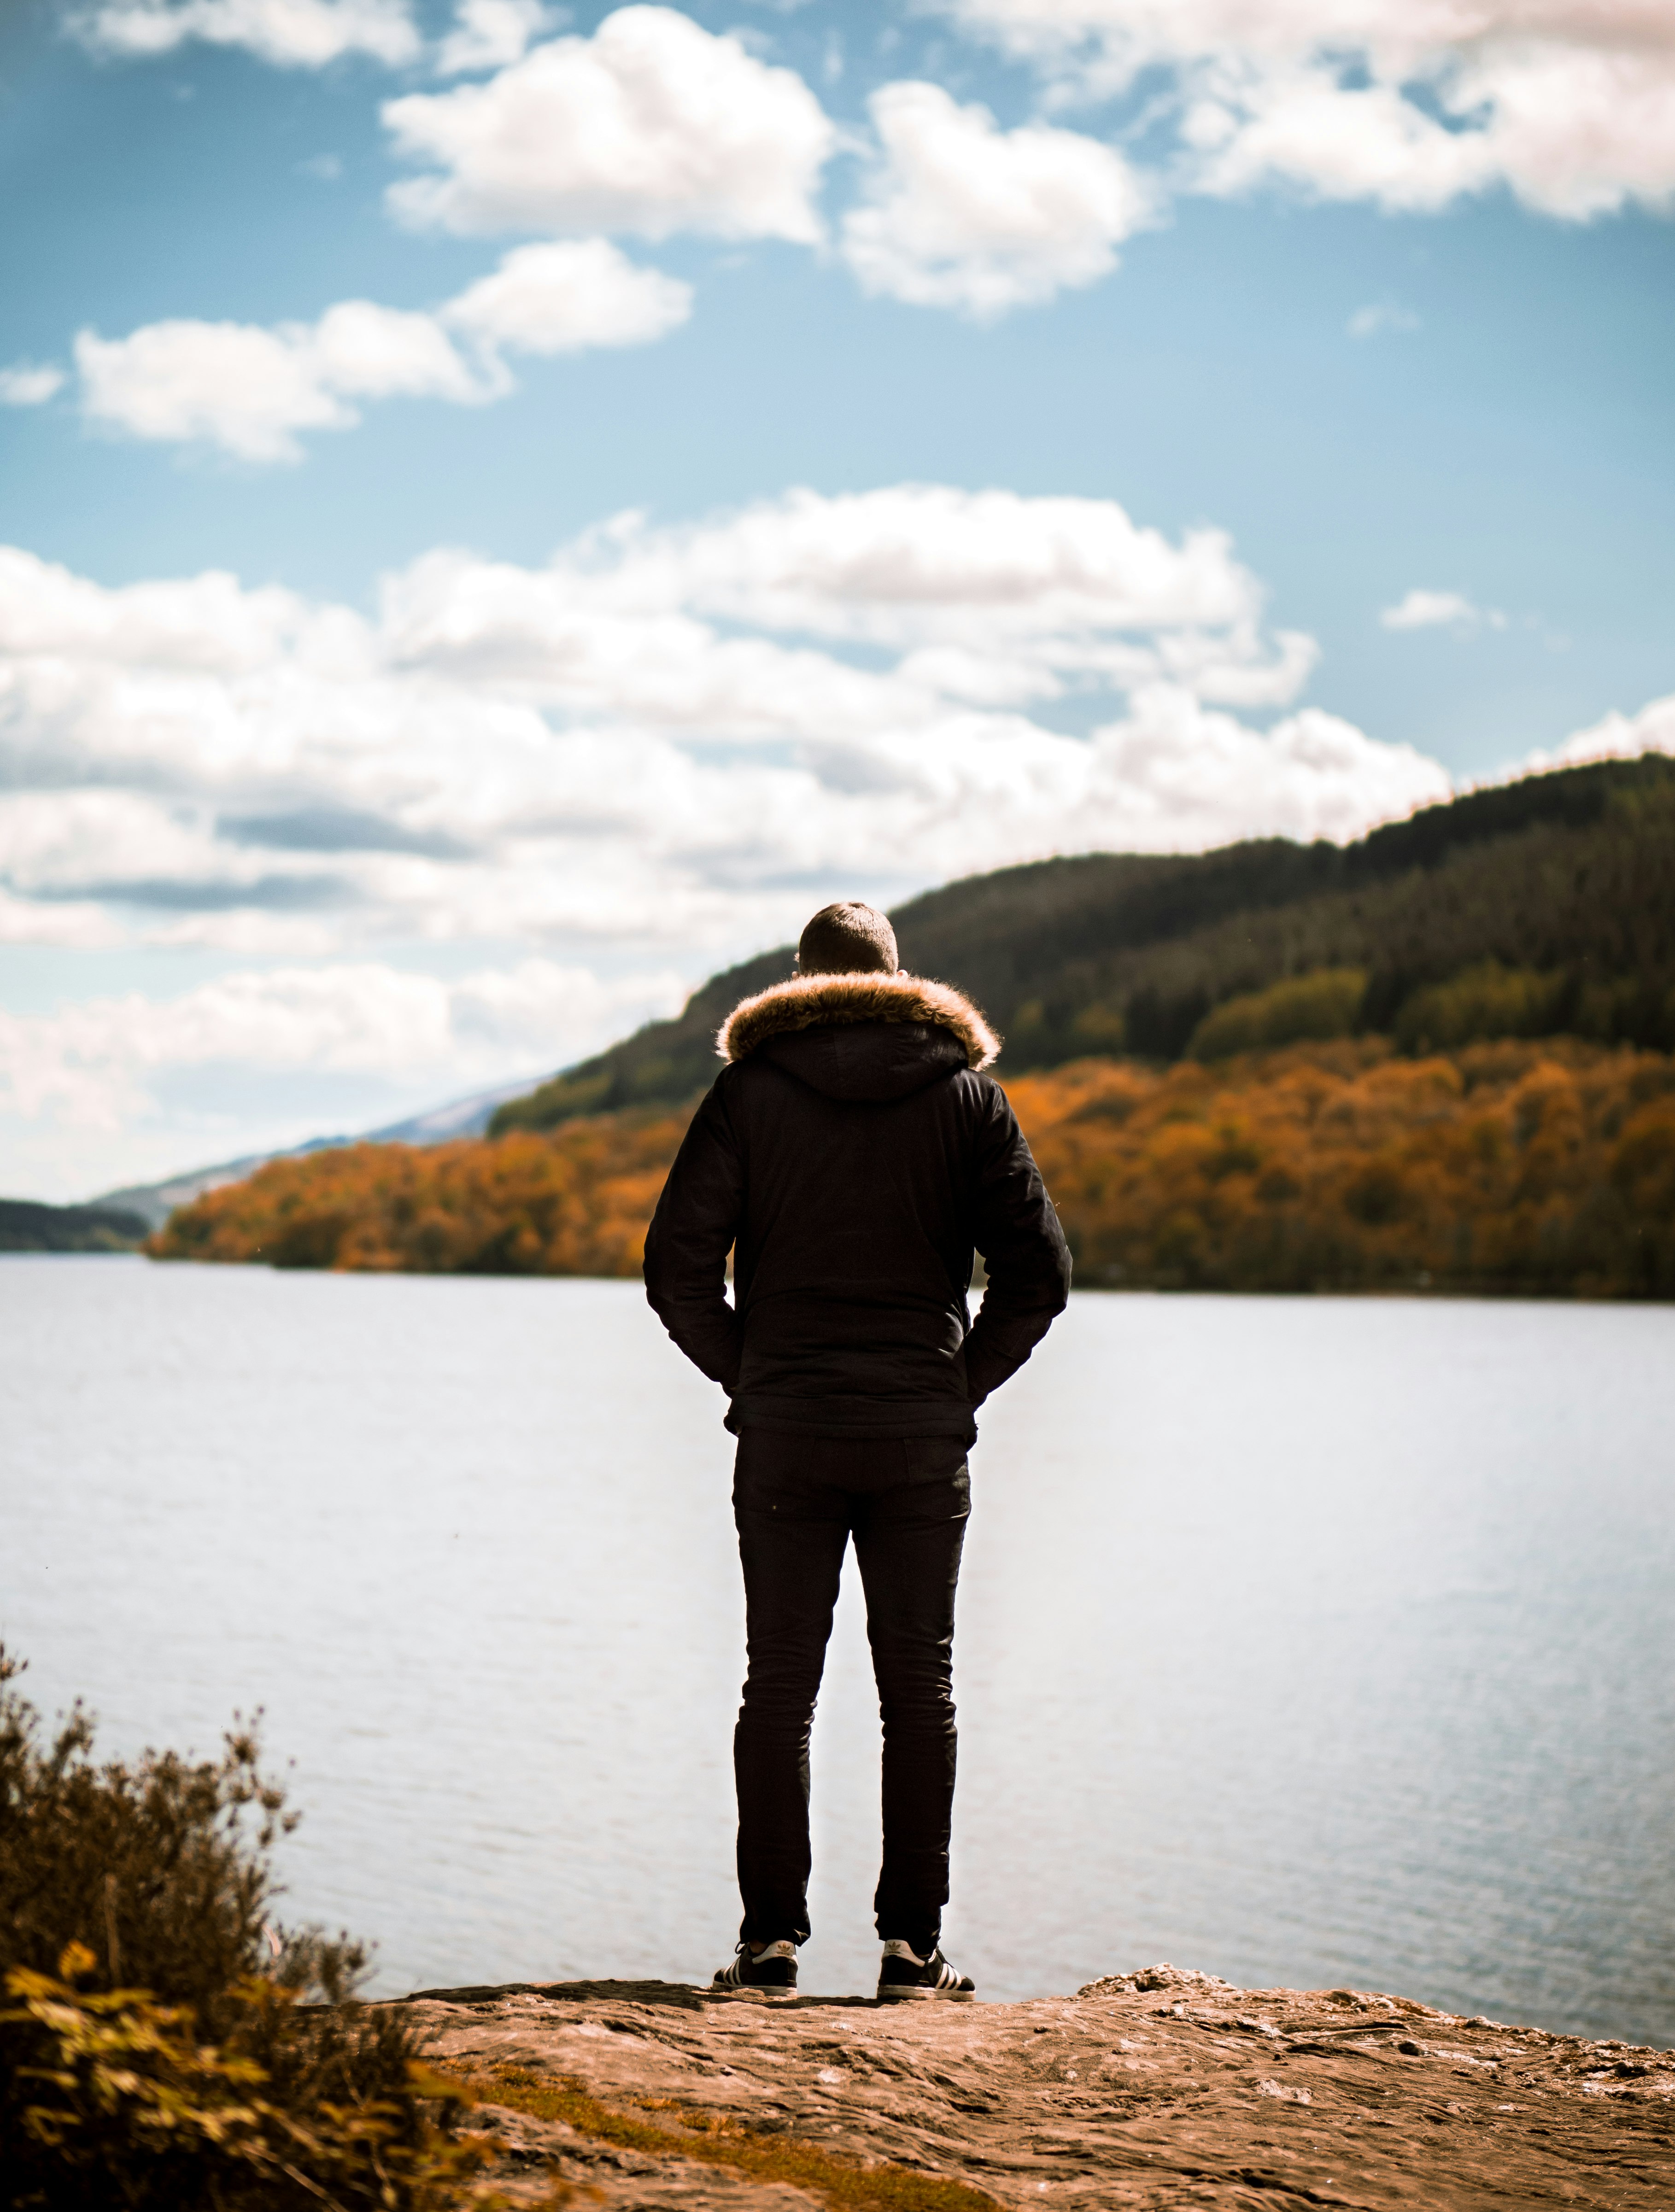 person wearing jacket standing on front of calm body of water during daytime